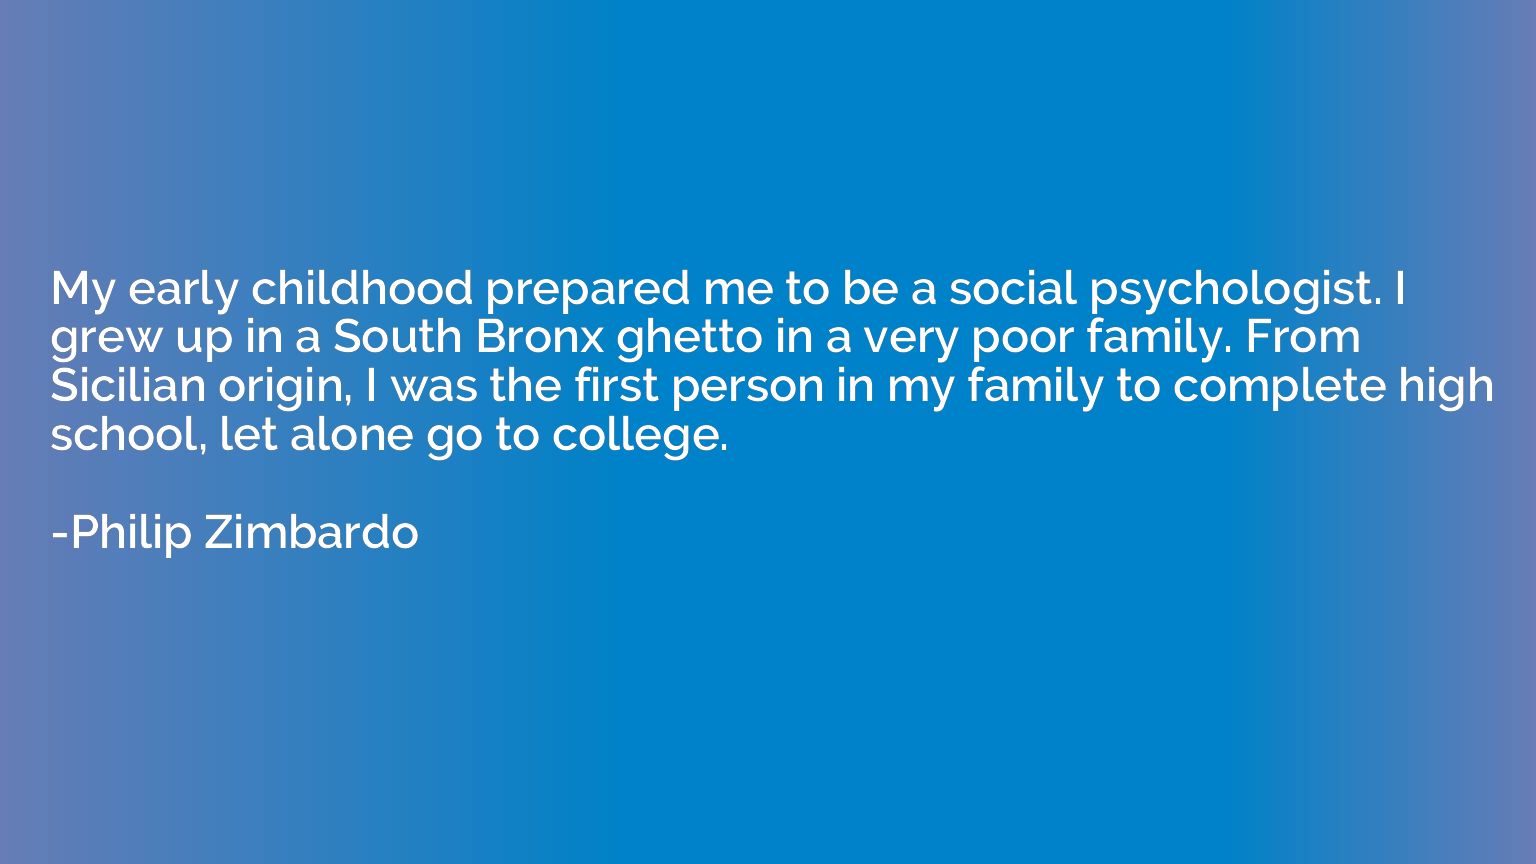 My early childhood prepared me to be a social psychologist. 